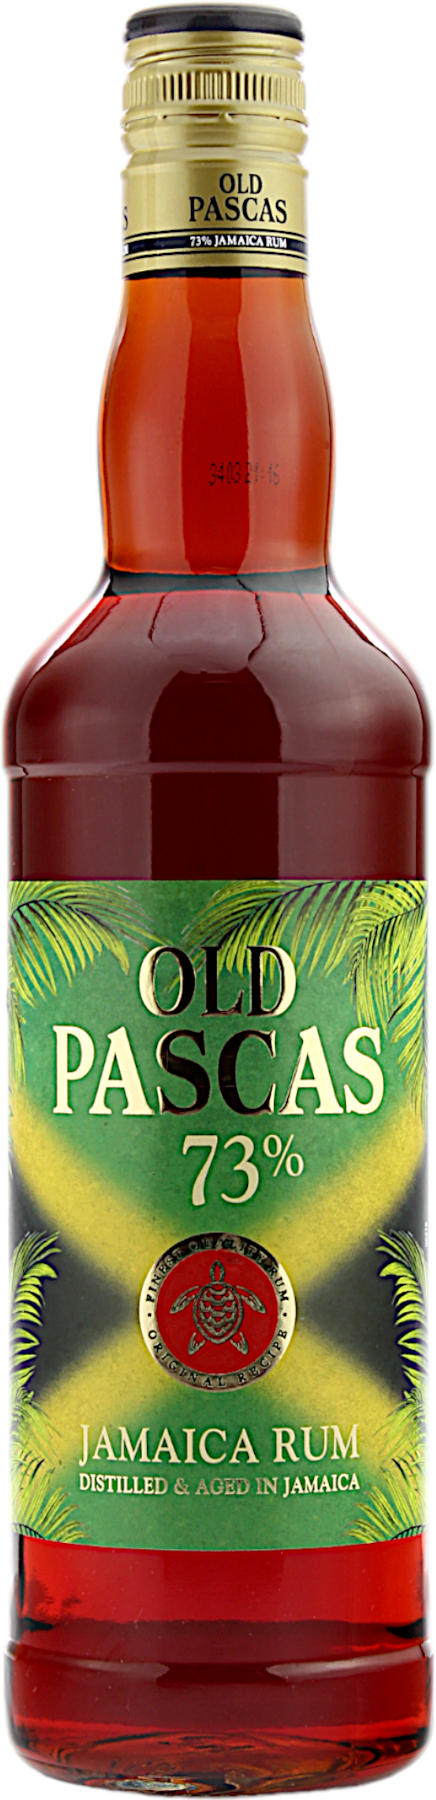 Old Pascas Jamaica Overproofed Rum 73.0% 0,7l